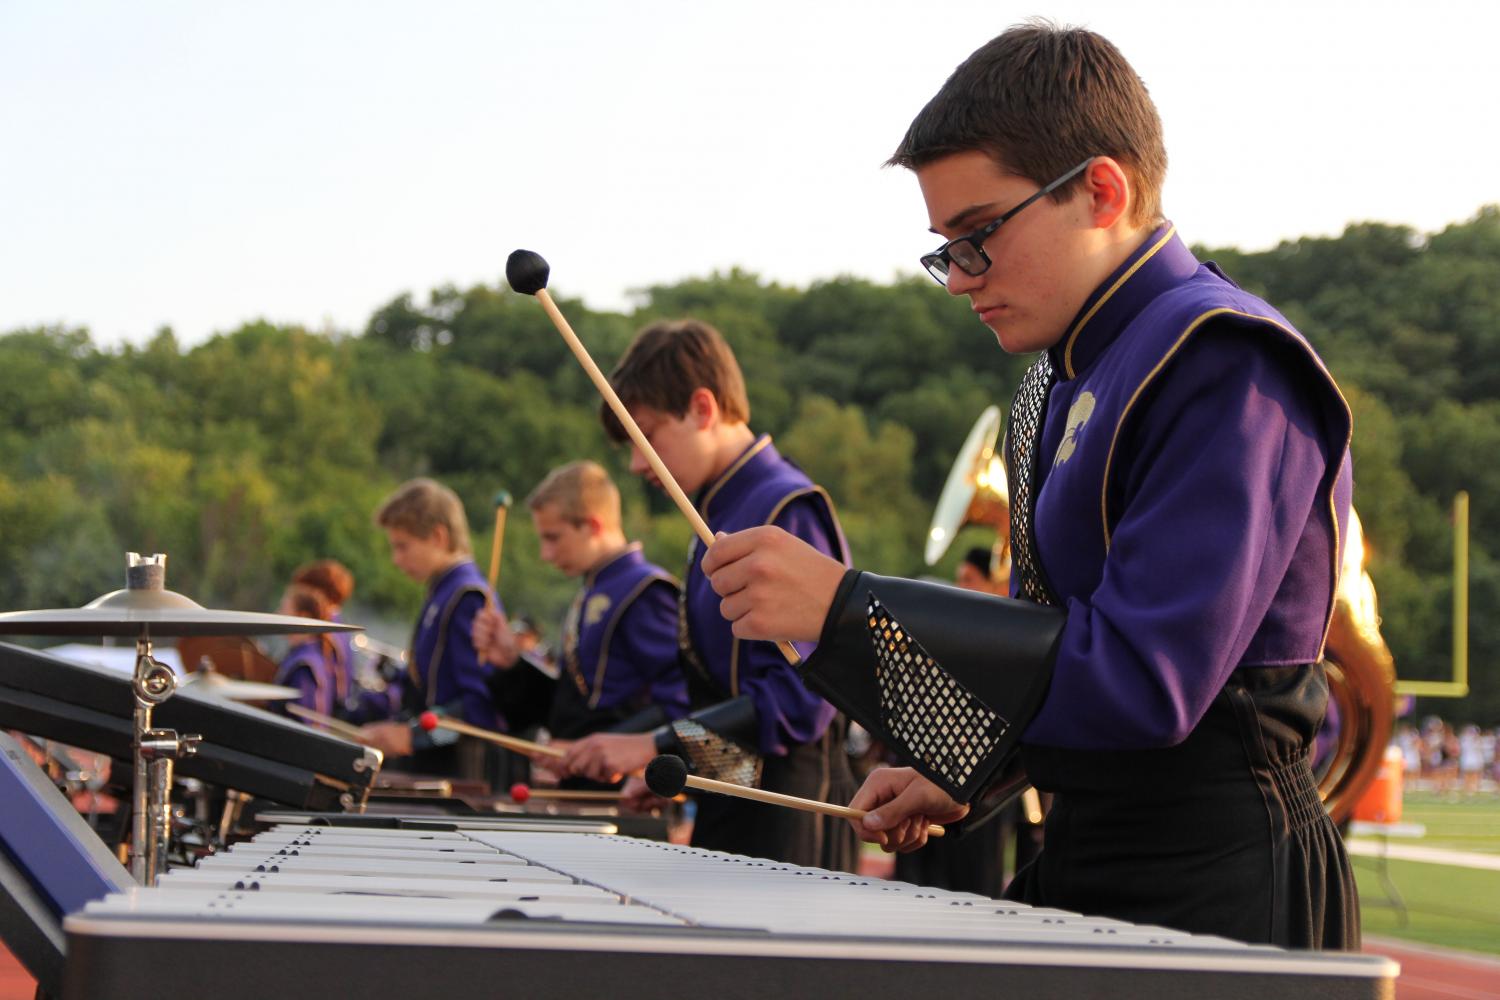 Cole+Huntley+plays+the+vibraphone+during+On+Eureka%2C+at+the+beginning+of+the+varsity+football+game+against+Pattonville%2C+Sept.+1.+My+favorite+part+of+preforming+at+the+games+is+showing+everyone+what+weve+been+learning+by+playing+the+show+music%2C+Huntley+said.+After+practicing+for+hours+on+marching+and+music%2C+the+shows+give+us+time+to+piece+it+all+together+and+show+people+how+hard+we+work.+